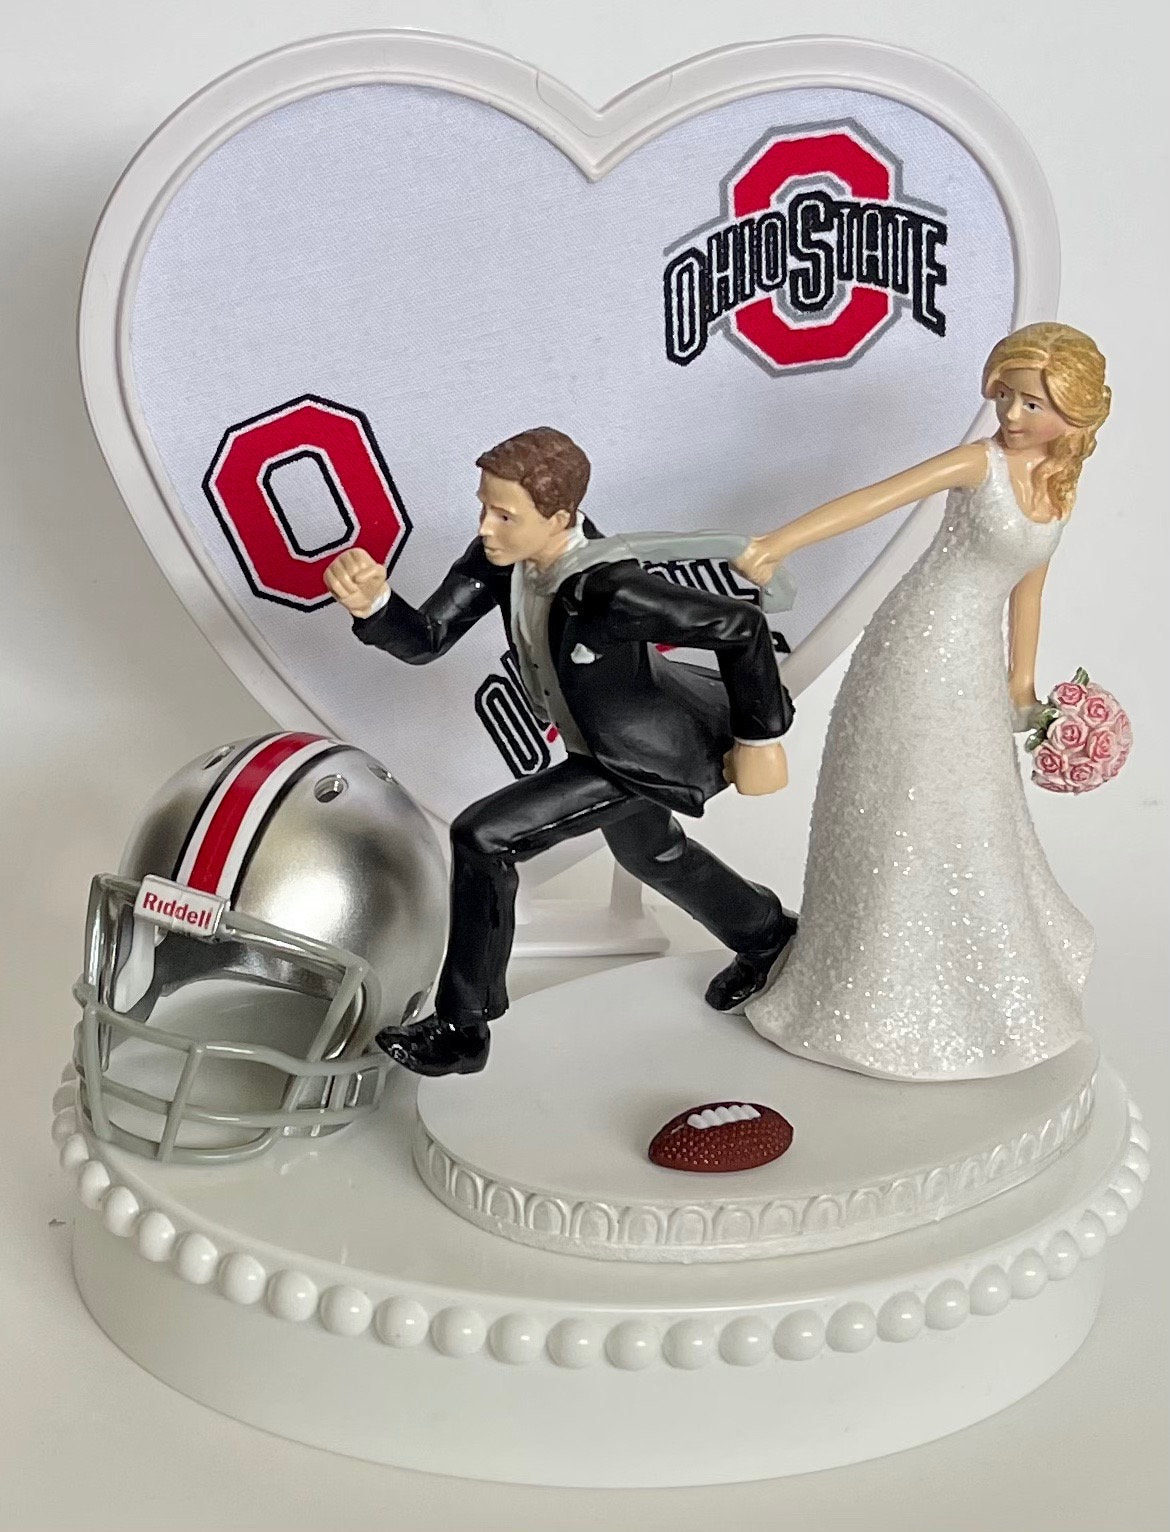 Wedding Cake Topper Ohio St. University Buckeyes Football Themed Pulling Funny Bride and Groom Humorous OSU State Sports Fans Groom's Cake